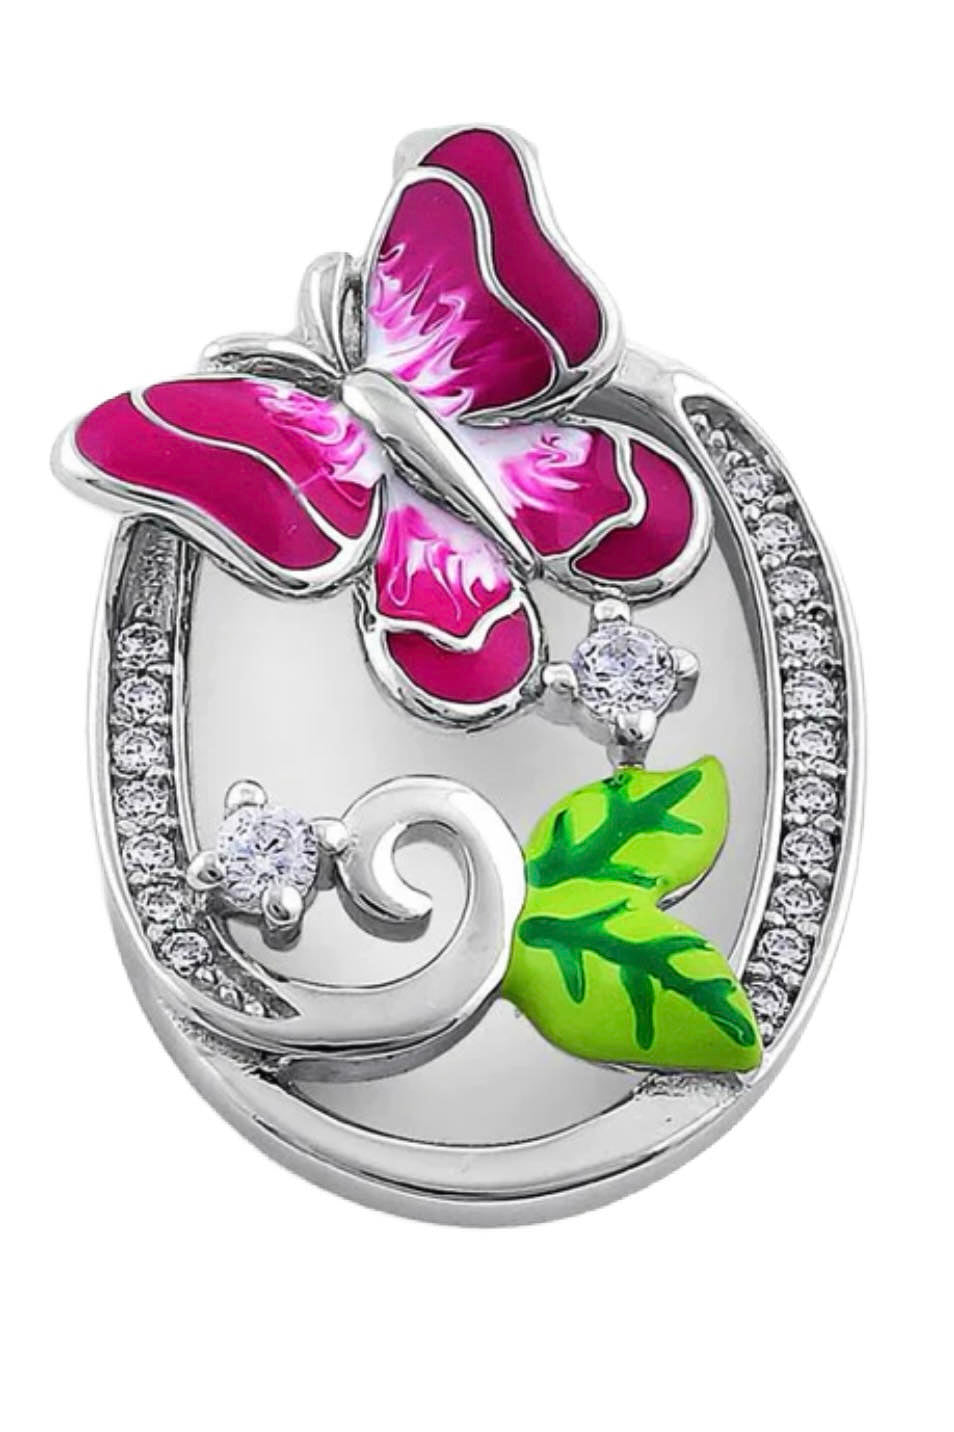 Hand-Painted Enamel Pink Butterfly and CZ on Sterling Silver Silver Pendant